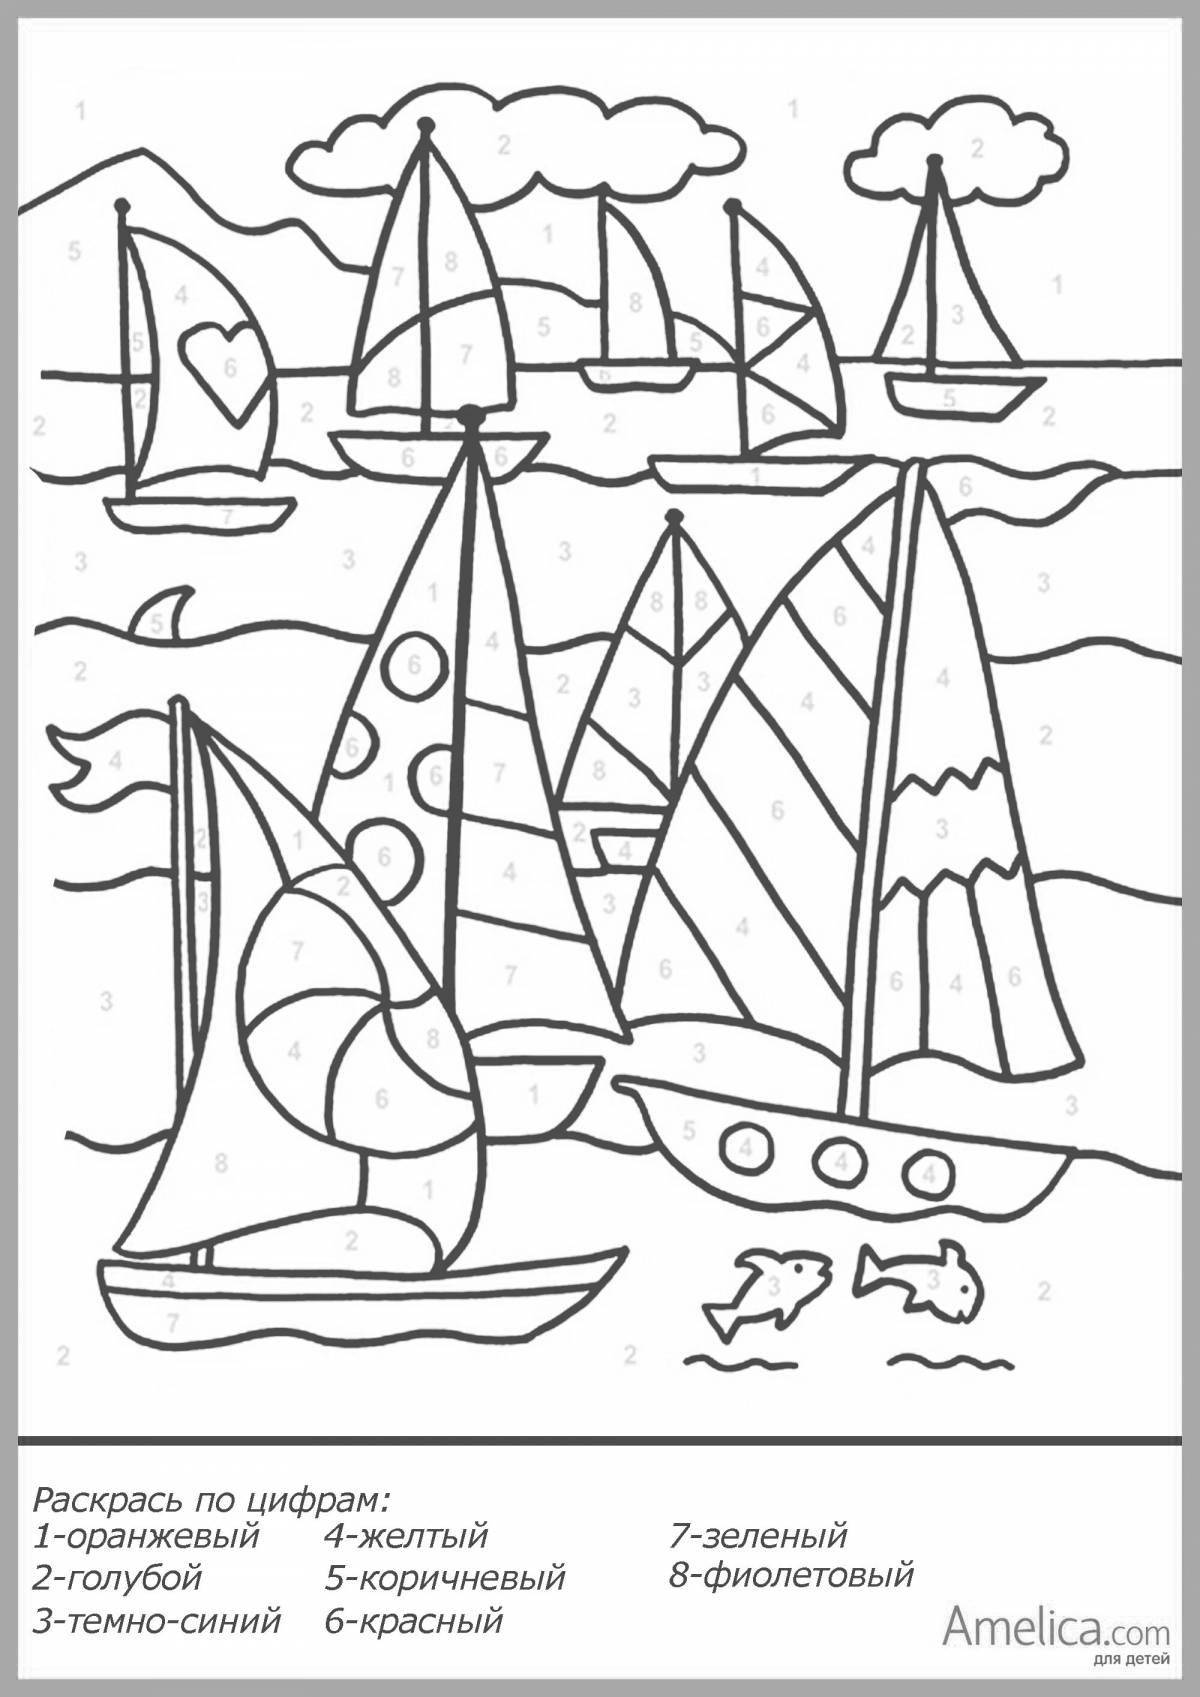 Colourful coloring by numbers for boys 6-7 years old